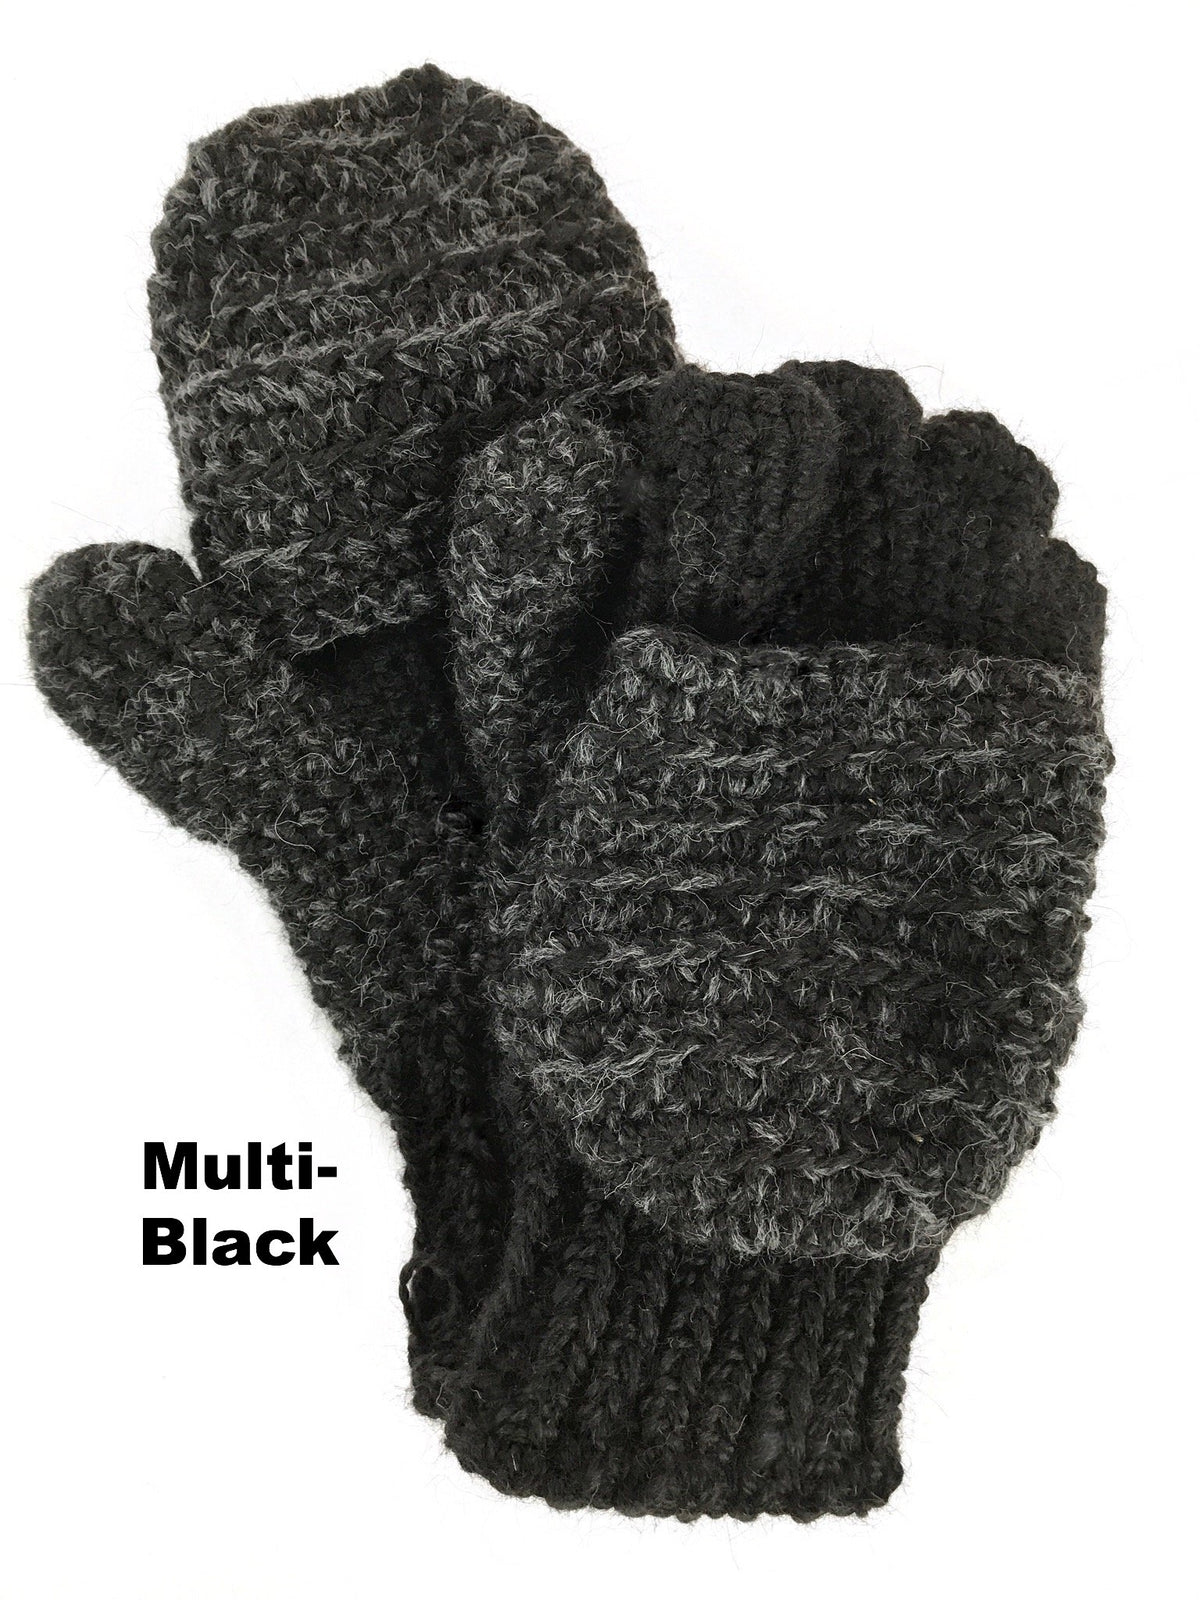 A product photo with a white background of a pair of soft warm winter stylish cozy comfortable fashionable moisture wicking knitted crochet heavyweight flip top gloves mittens handmade in Montana from dark gray and black alpaca wool yarn.